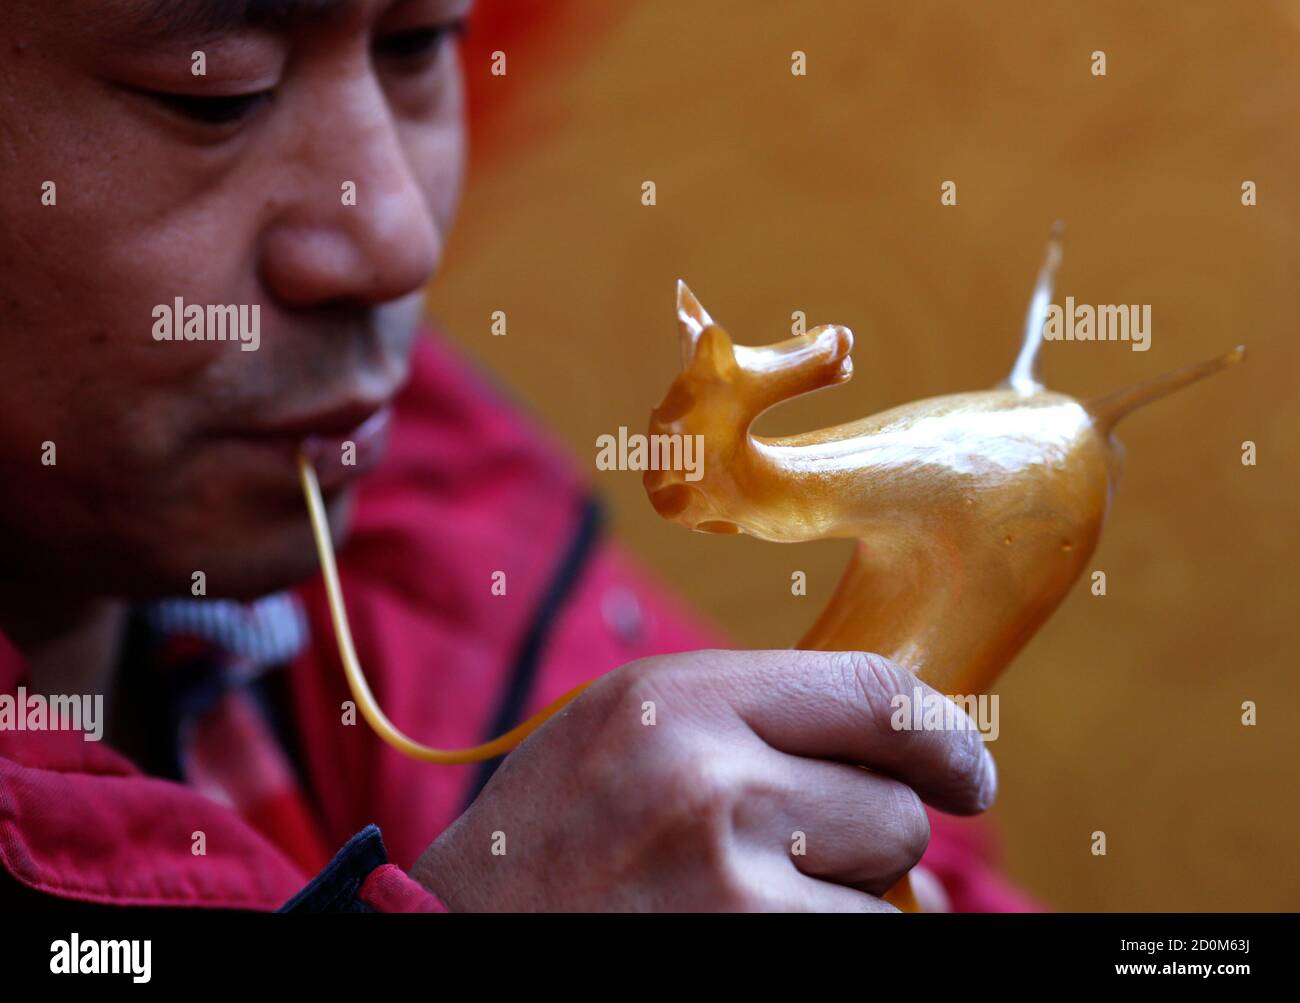 Folk artist Hou Gouyi blows boiled sugar to form the shape of a horse at a temple fair for the traditional Chinese Spring Festival on the third day of the Lunar New Year at Ditan Park, also known as the Temple of Earth, in Beijing February 2, 2014. Sugar sculpture blowing is a traditional Chinese folk art where artists blow and sculpt hot sugar to create three-dimensional figures. The Lunar New Year, or Spring Festival, began on January 31 and marked the start of the Year of the Horse, according to the Chinese zodiac.   REUTERS/Kim Kyung-Hoon (CHINA - Tags: ANNIVERSARY SOCIETY) Stock Photo